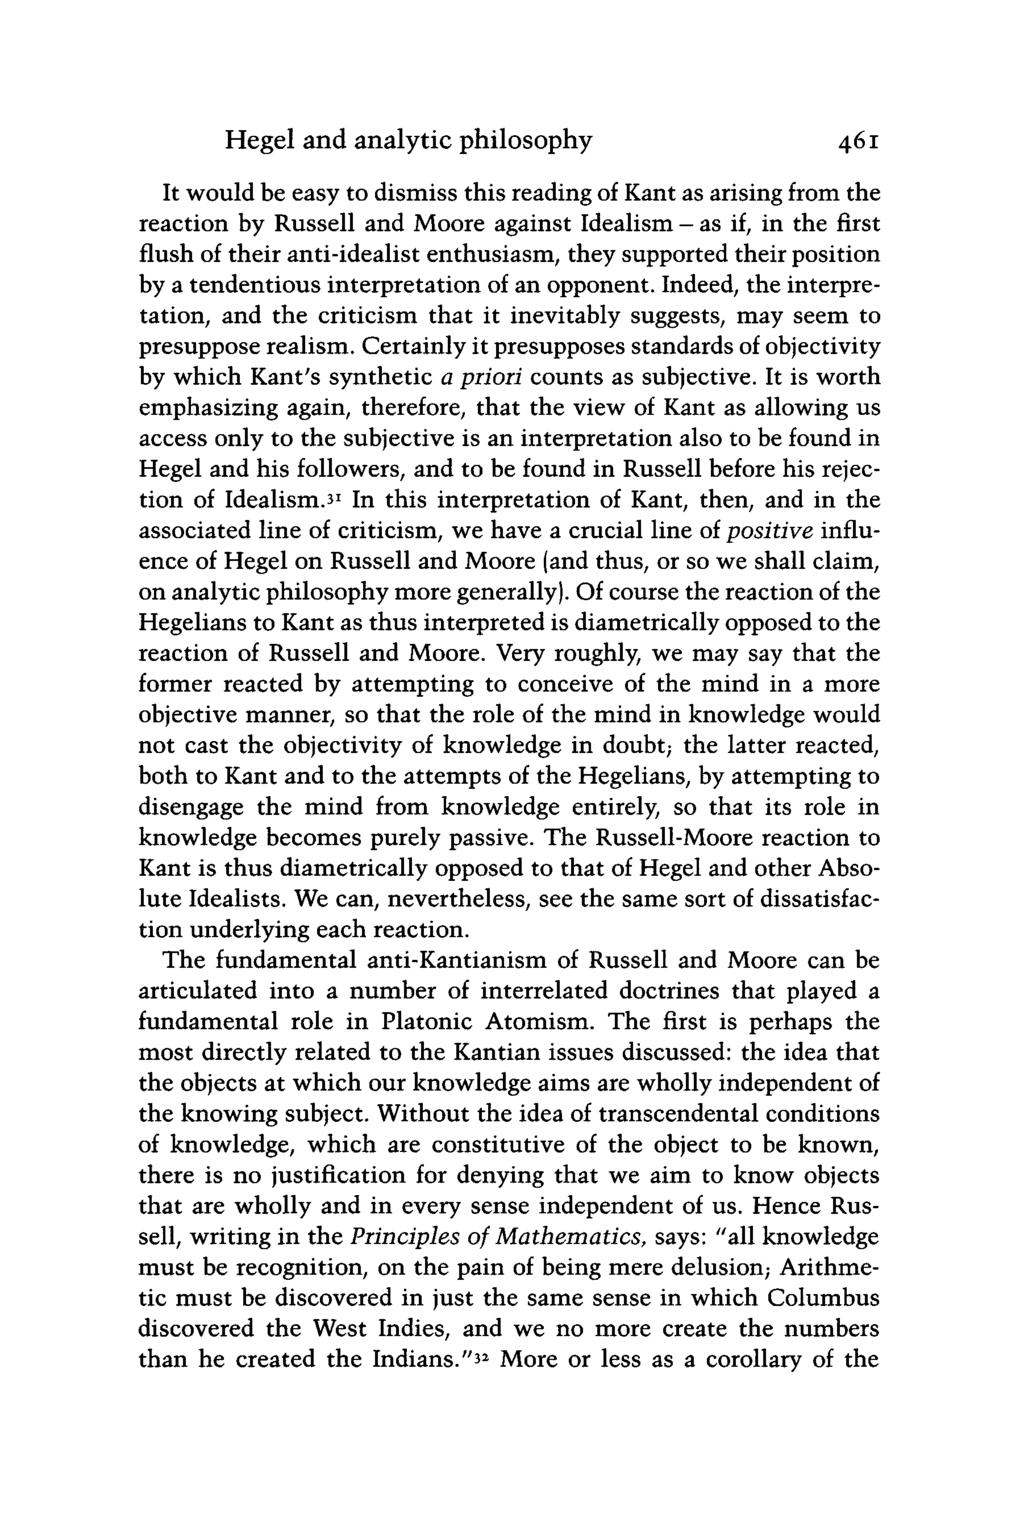 Hegel and analytic philosophy 461 It would be easy to dismiss this reading of Kant as arising from the reaction by Russell and Moore against Idealism - as if, in the first flush of their